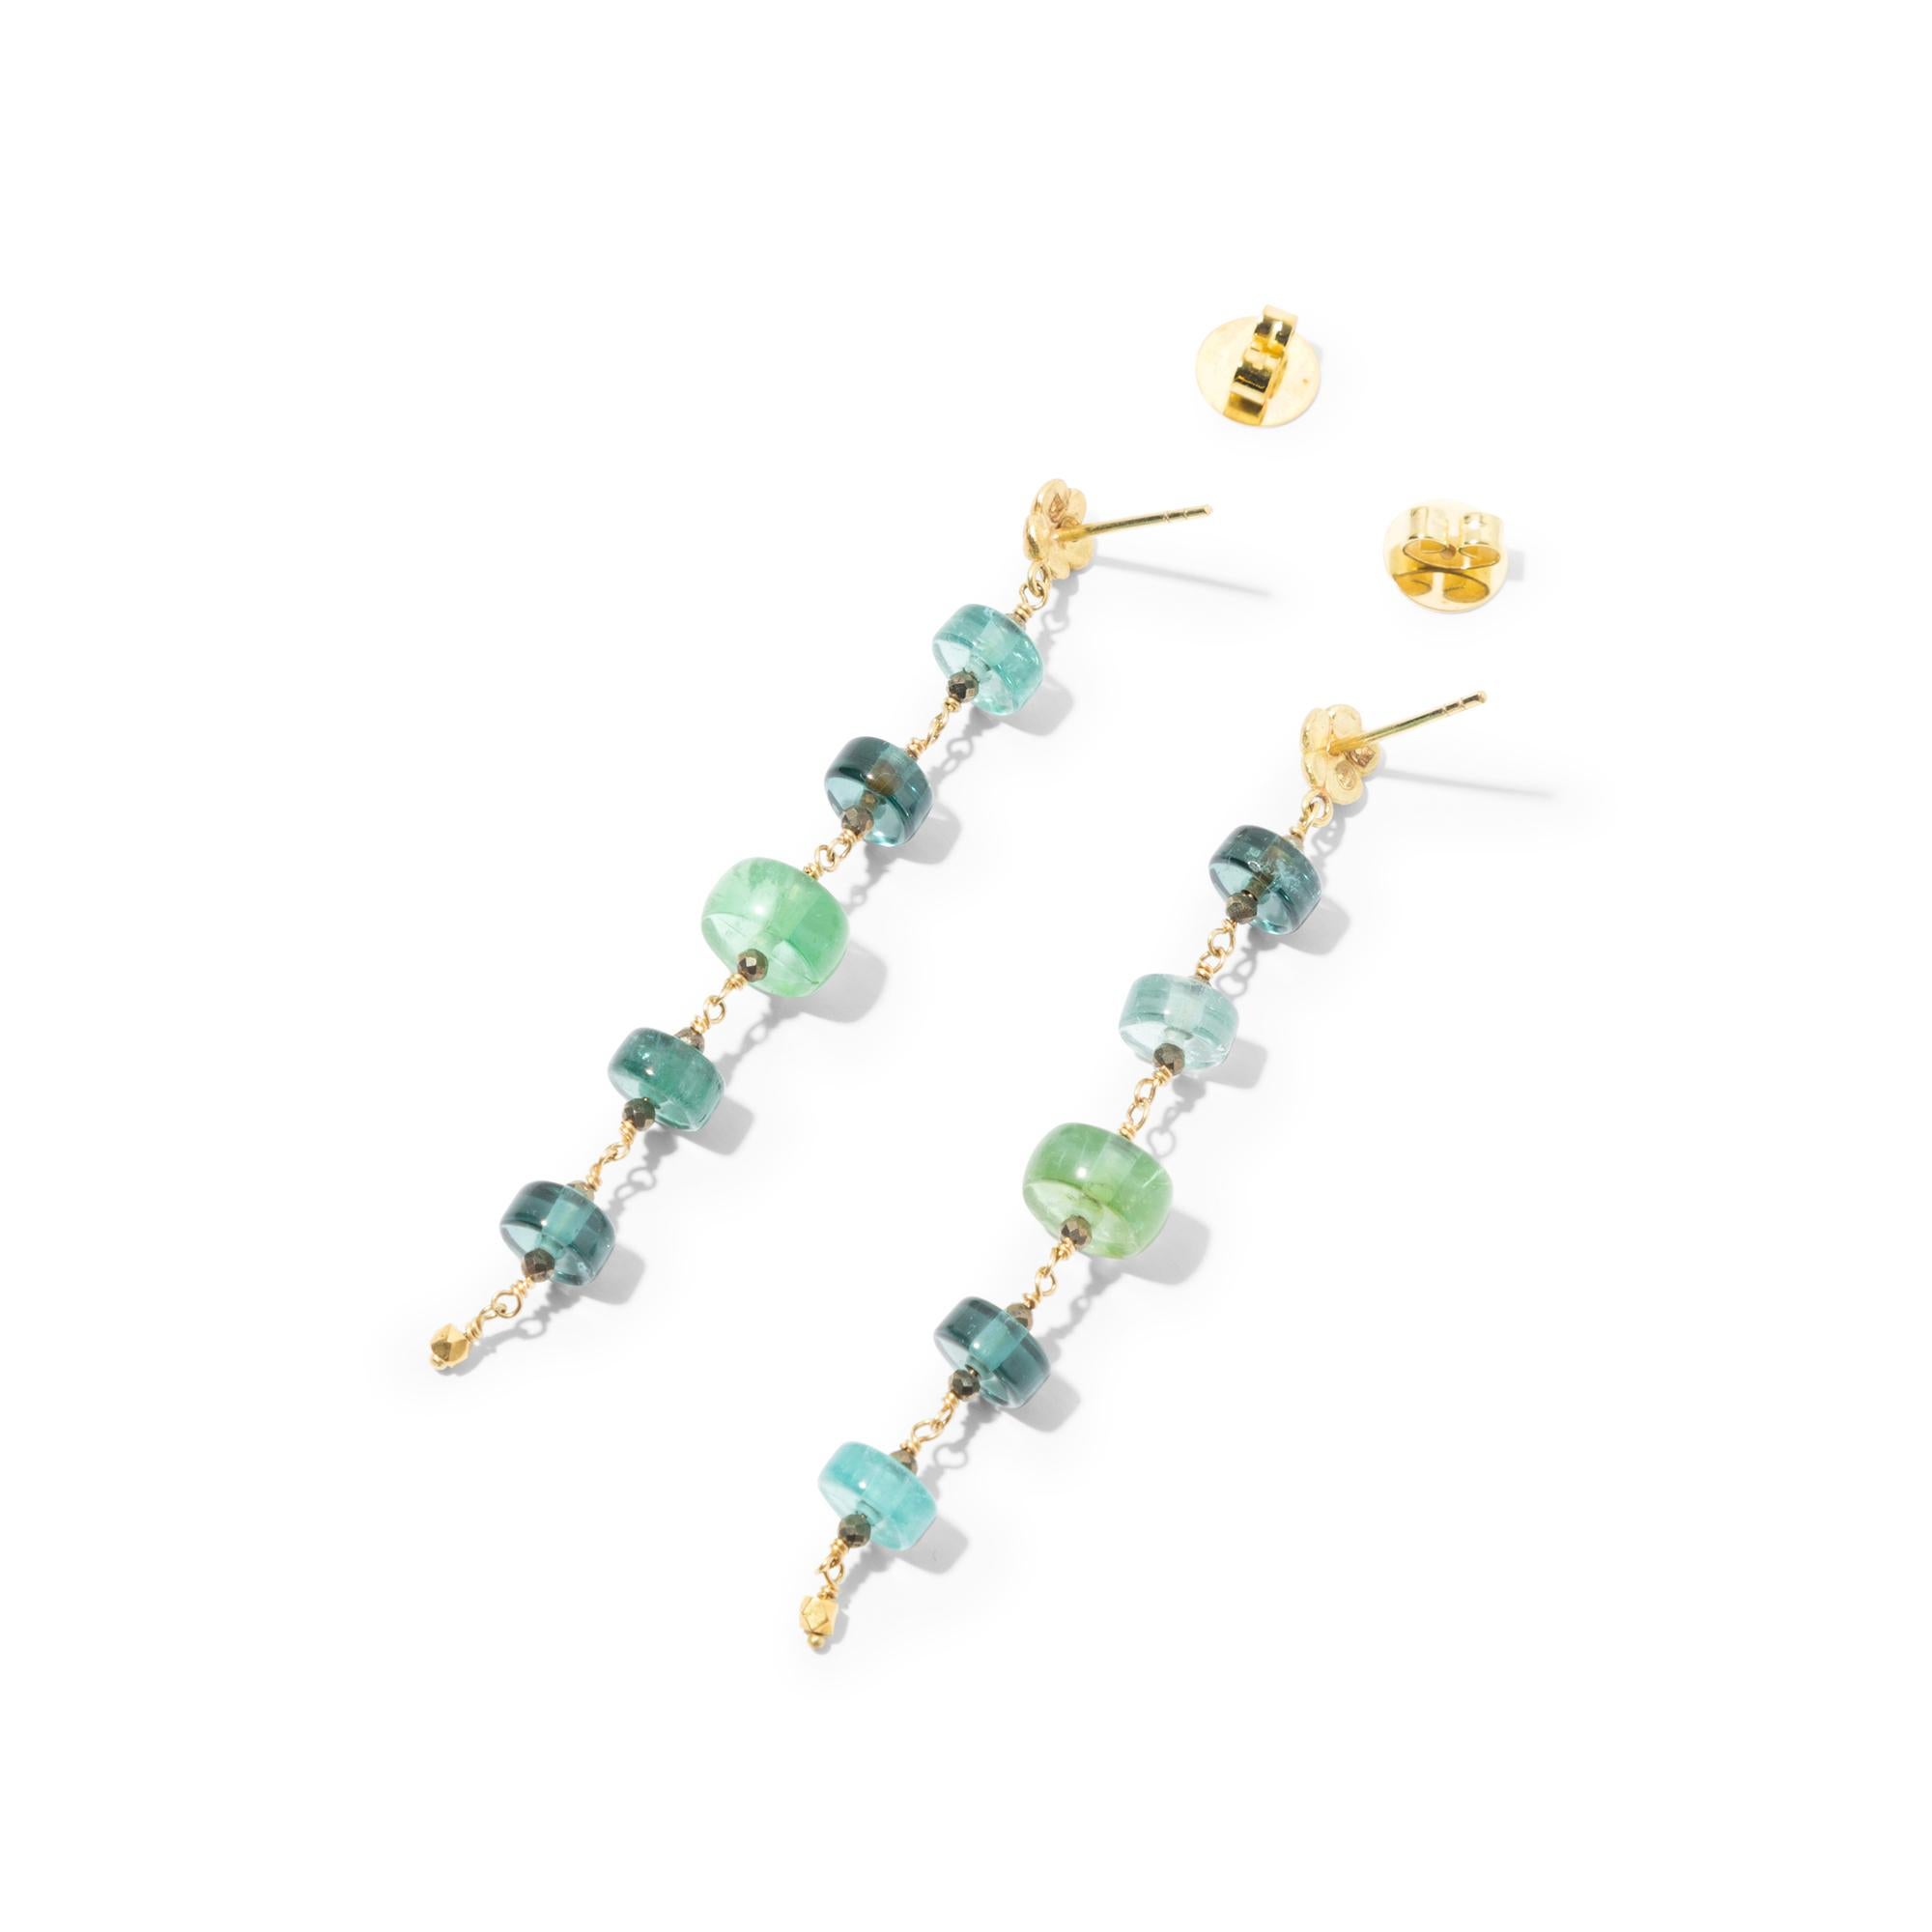 A lovely set of earrings with clear tourmaline gemstones in vivid tonal greens. The gemstones were obtained from a retiring cutter, and comes from an old lot of tourmalines which was cut in the last century. Nowadays, green tourmalines in gemstone